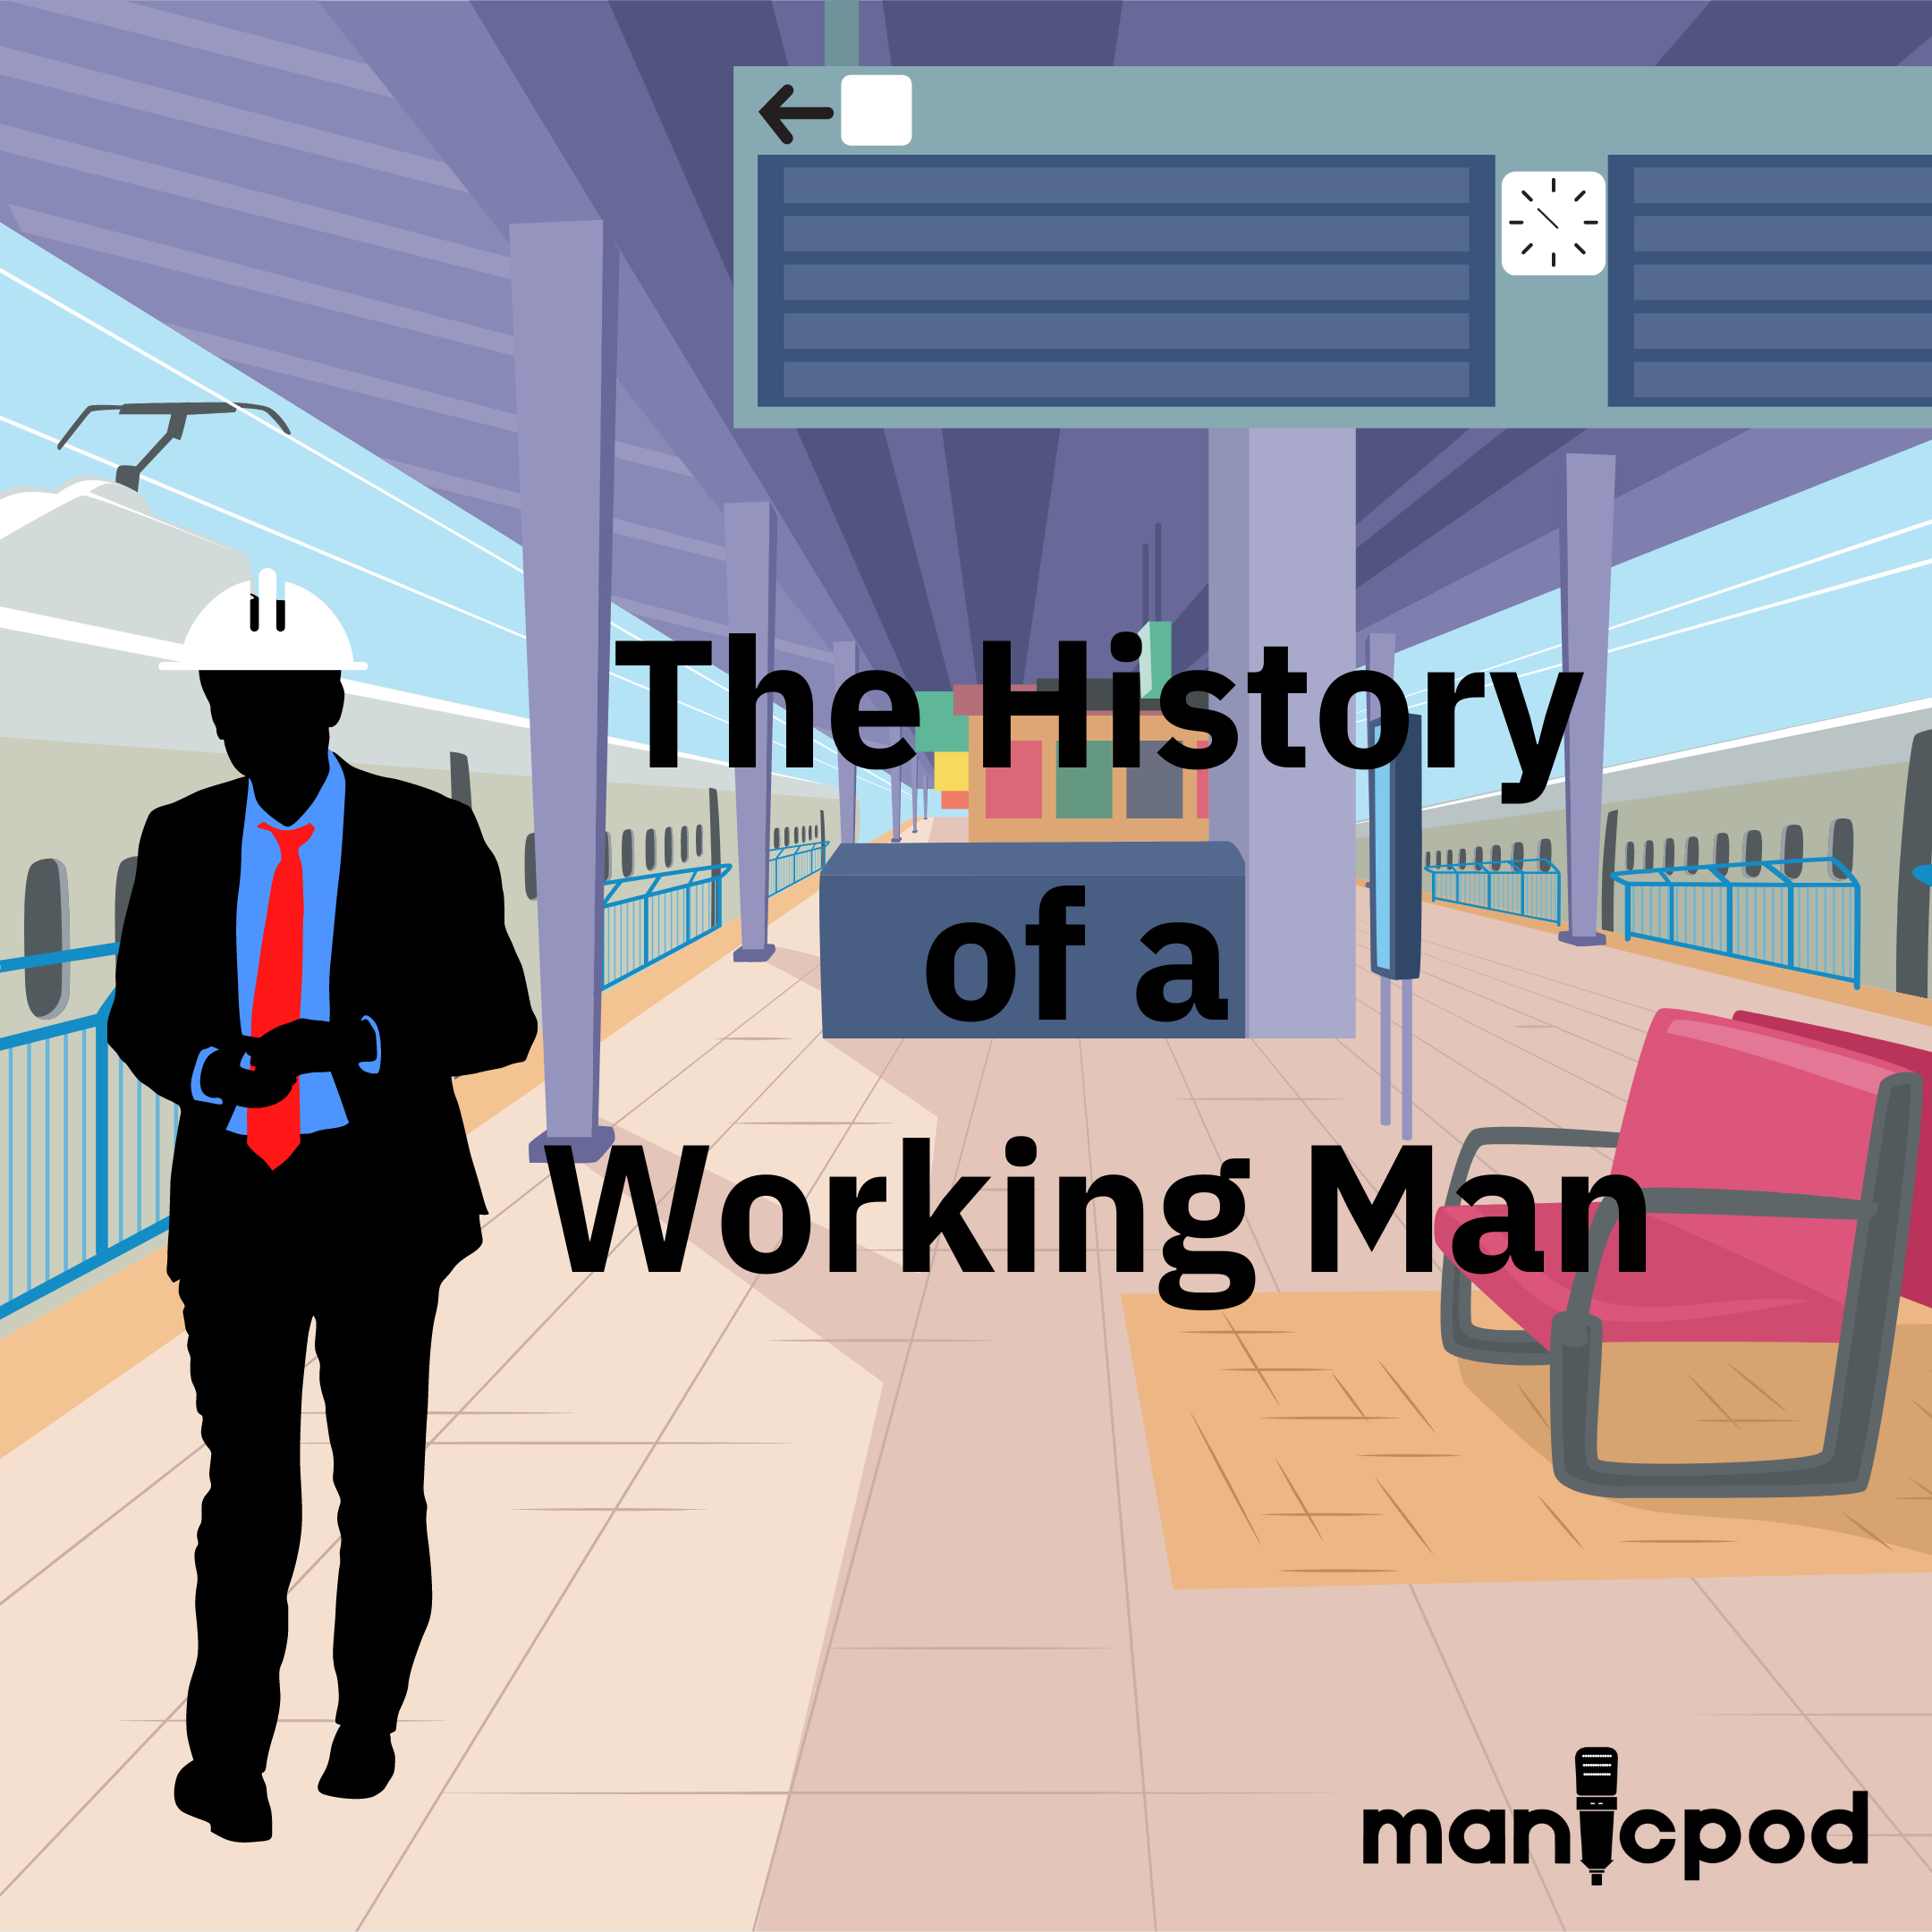 The History of a Working Man